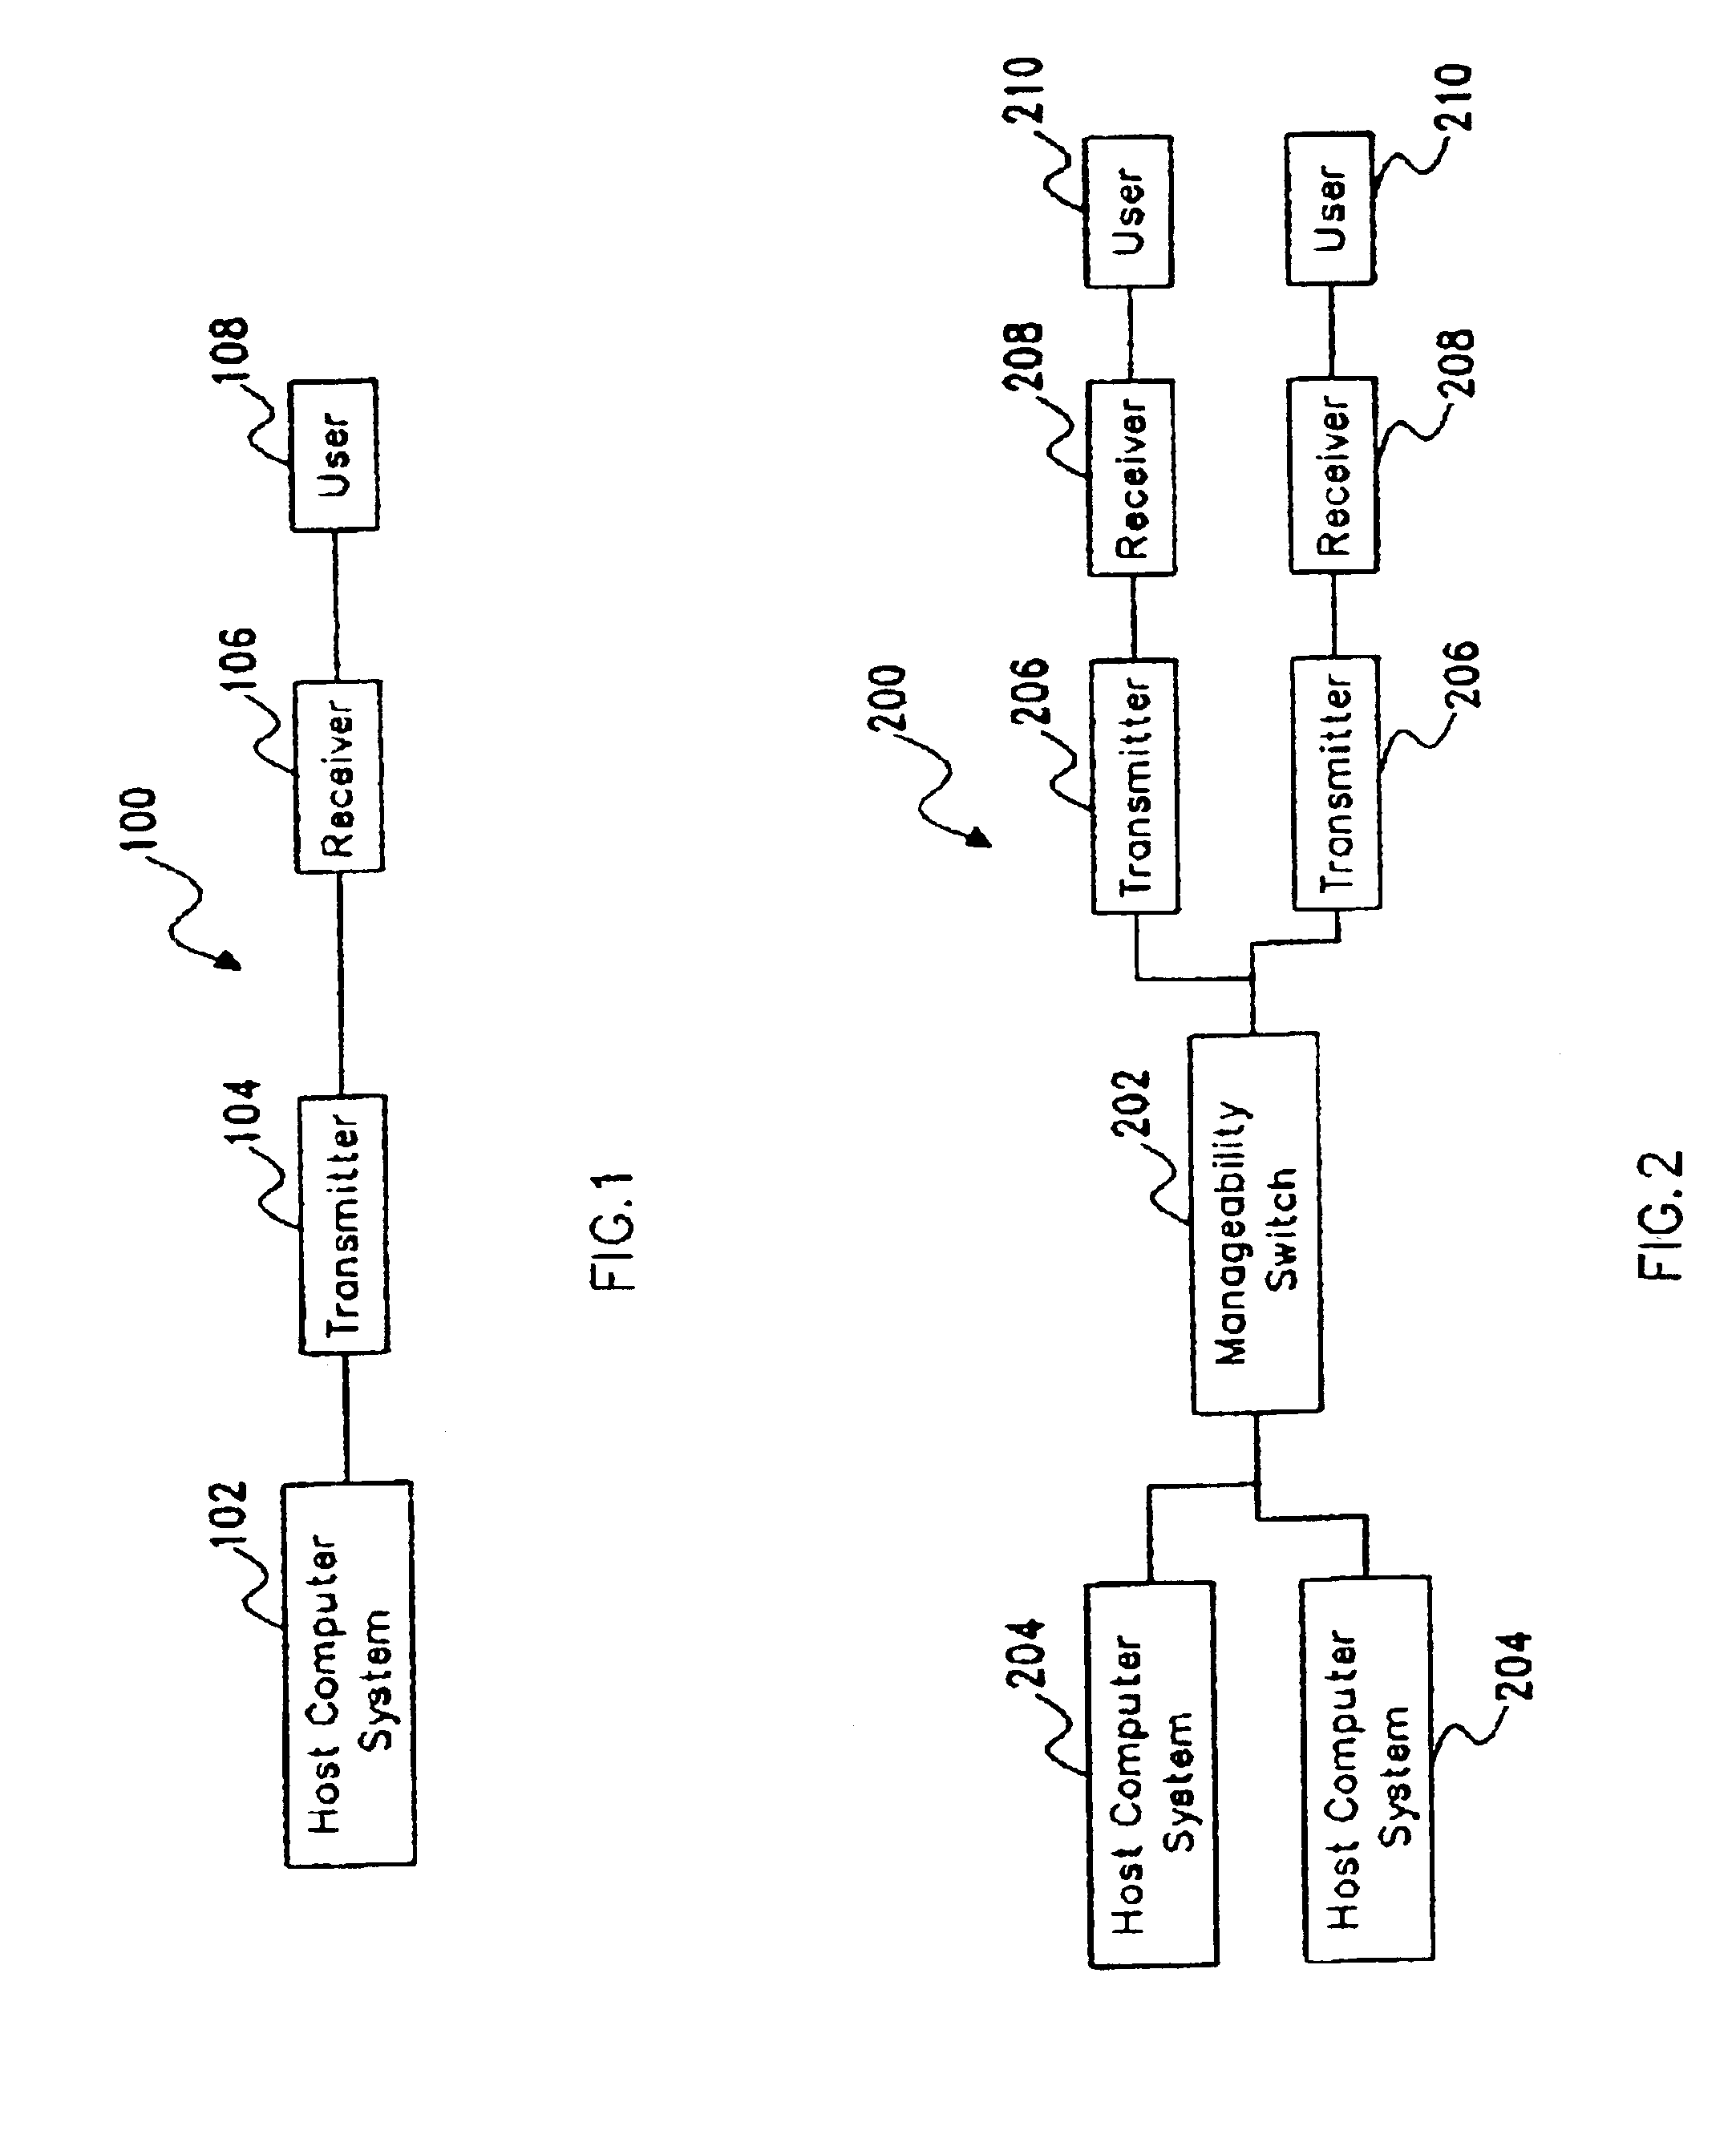 KVM extension configuration including a USB-to-non-USB adapter to support transmission of USB signals from a host to KVM devices located outside of USB operating ranges